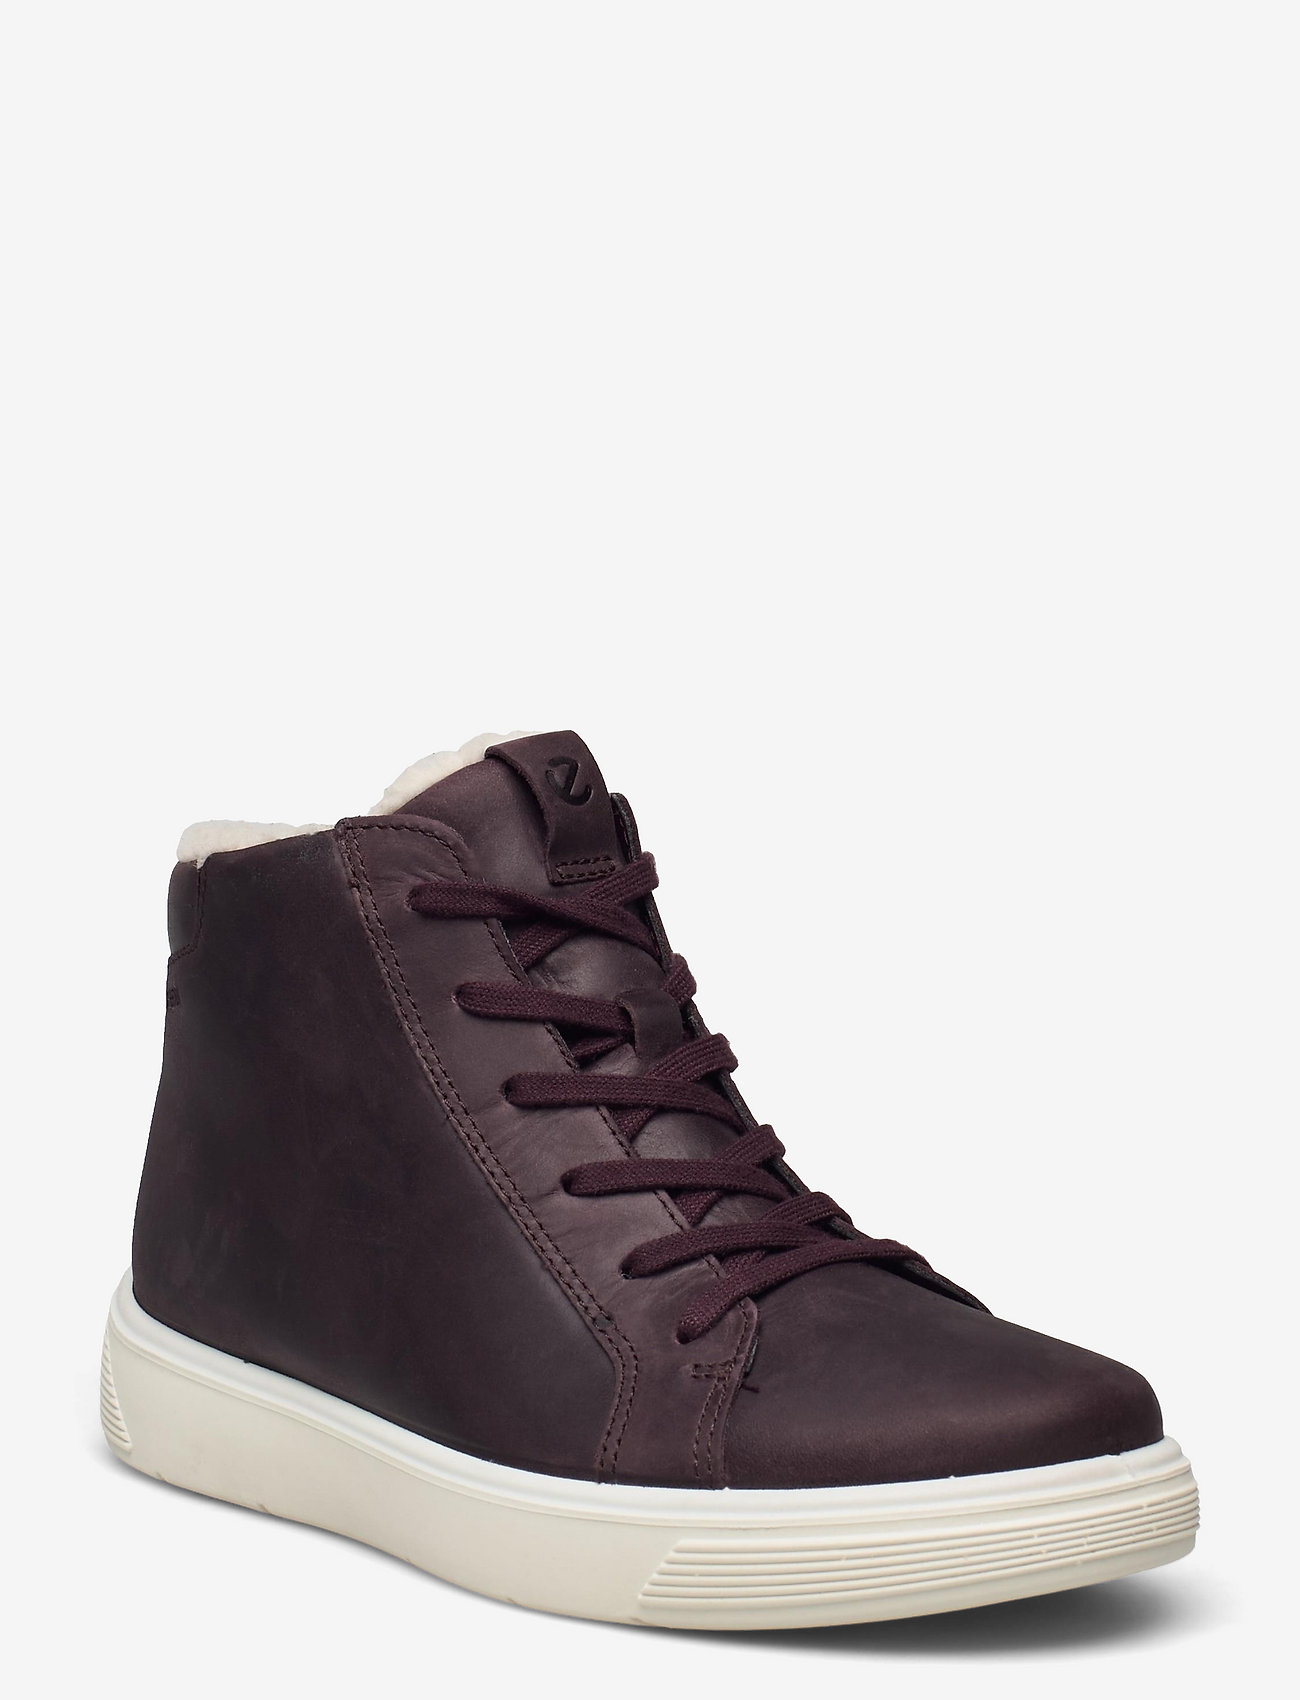 ECCO - STREET TRAY K - winter boots - fig - 0